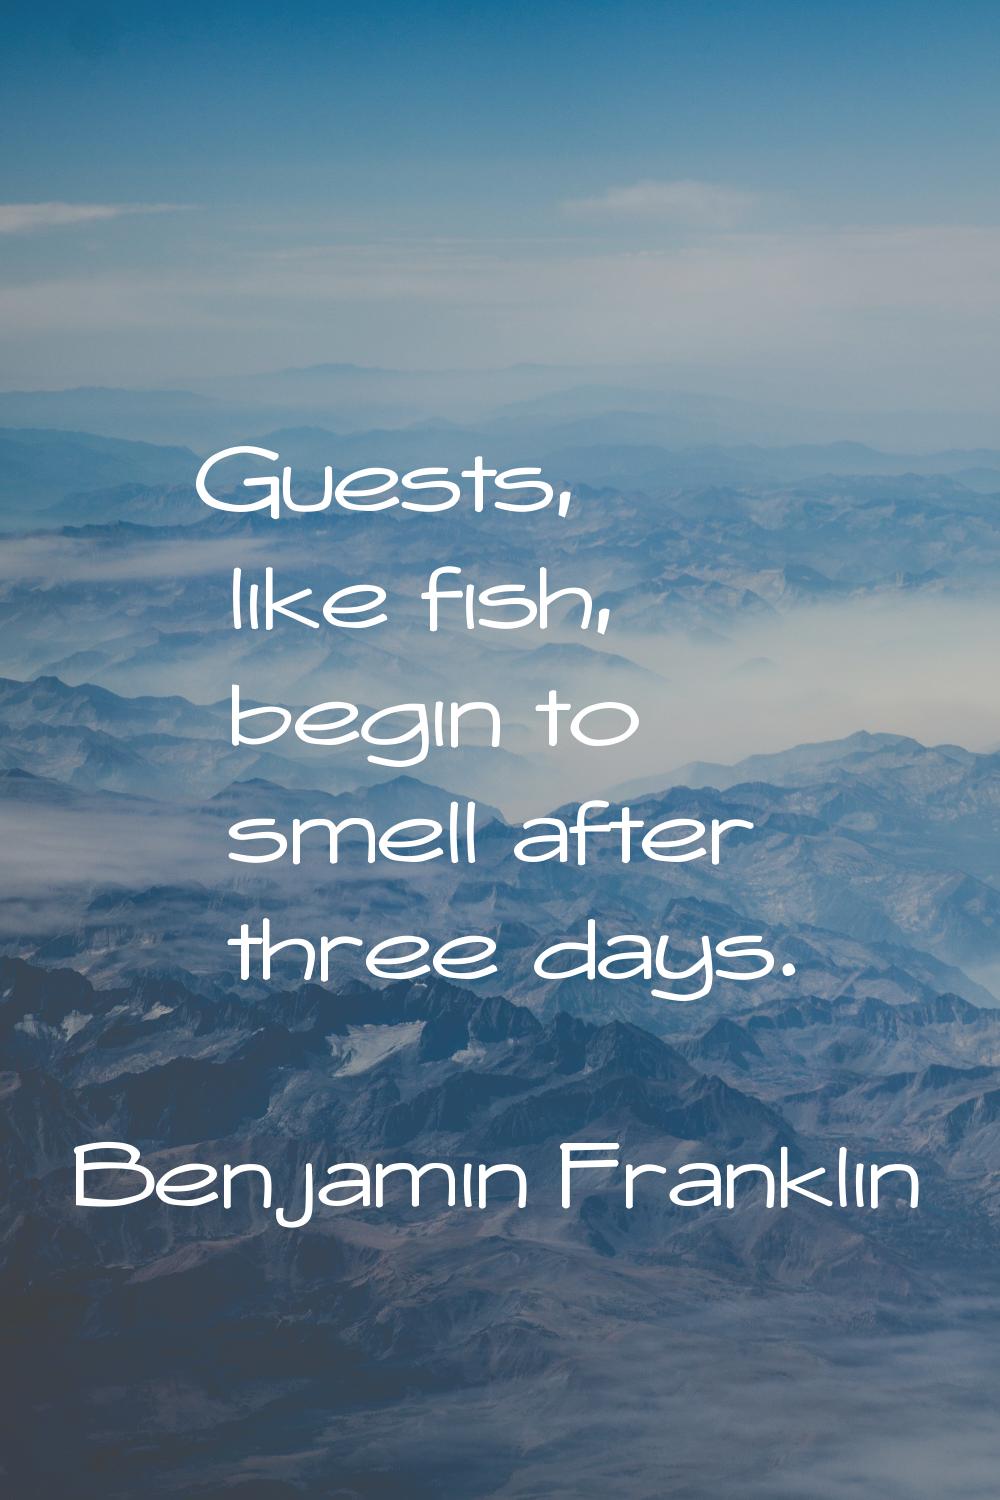 Guests, like fish, begin to smell after three days.